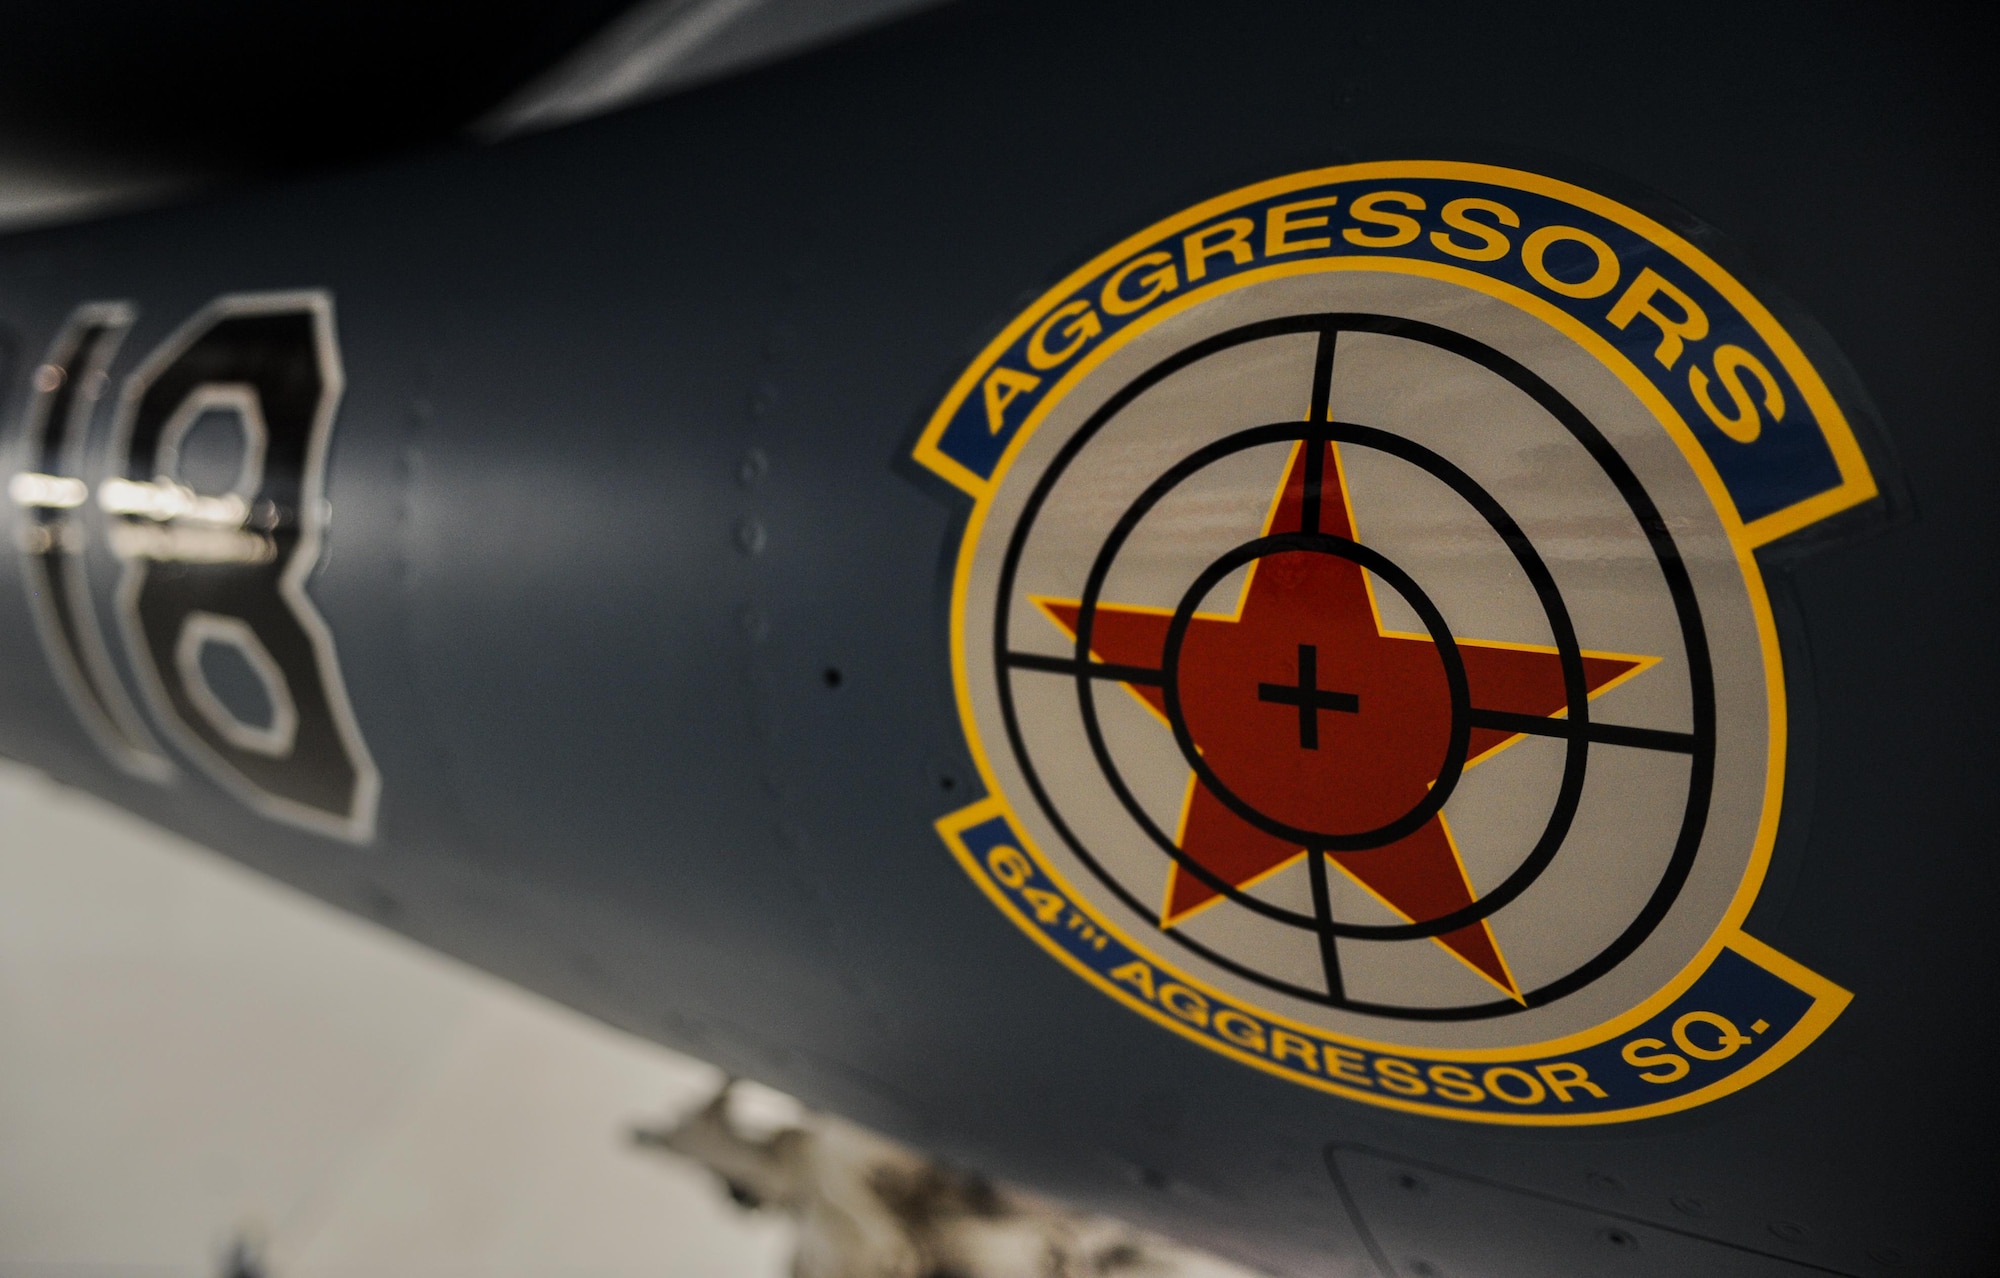 The 64th Aggressor Squadron, Nellis Air Force Base, Nev., debut the new paint scheme for the F-16 Aggressors during the 57th Adversary Tactics Group change of command ceremony Aug. 5, 2016. Since 1972, the 64th Aggressor Squadron has prepared combat air forces by providing realistic threat replication and training. (U.S. Air Force photo by Airman 1st Class Kevin Tanenbaum/Released)